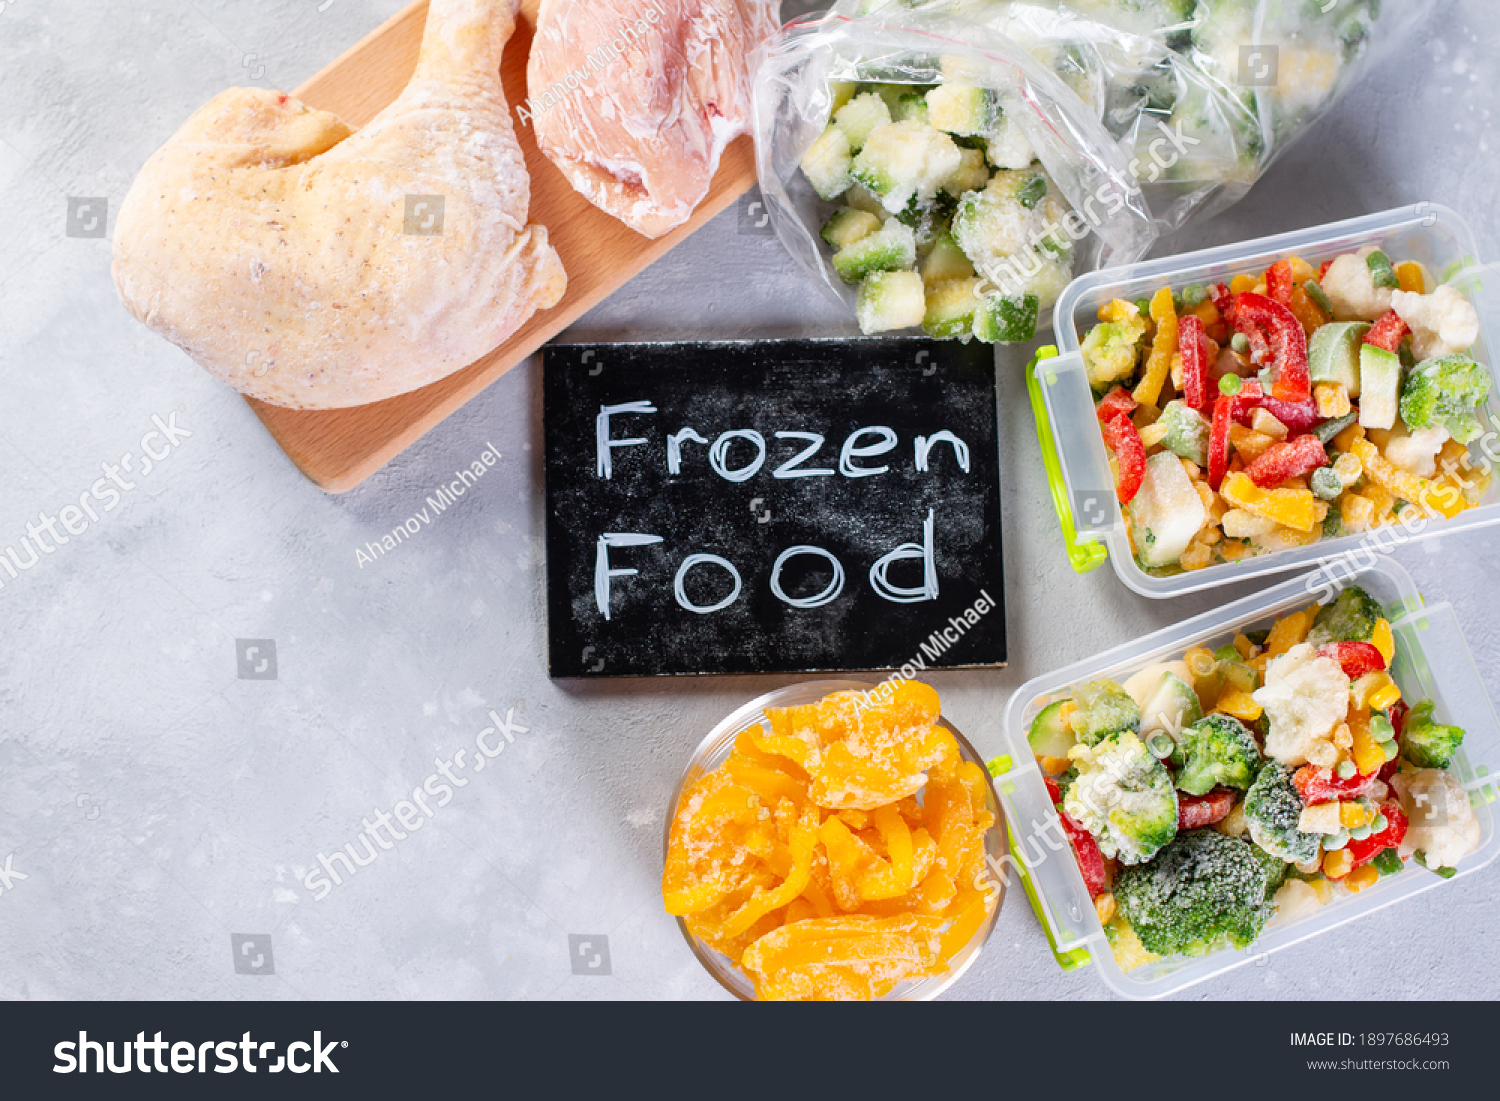 Frozen food, vegetables and meat. Place for text. Copy space. Top view #1897686493